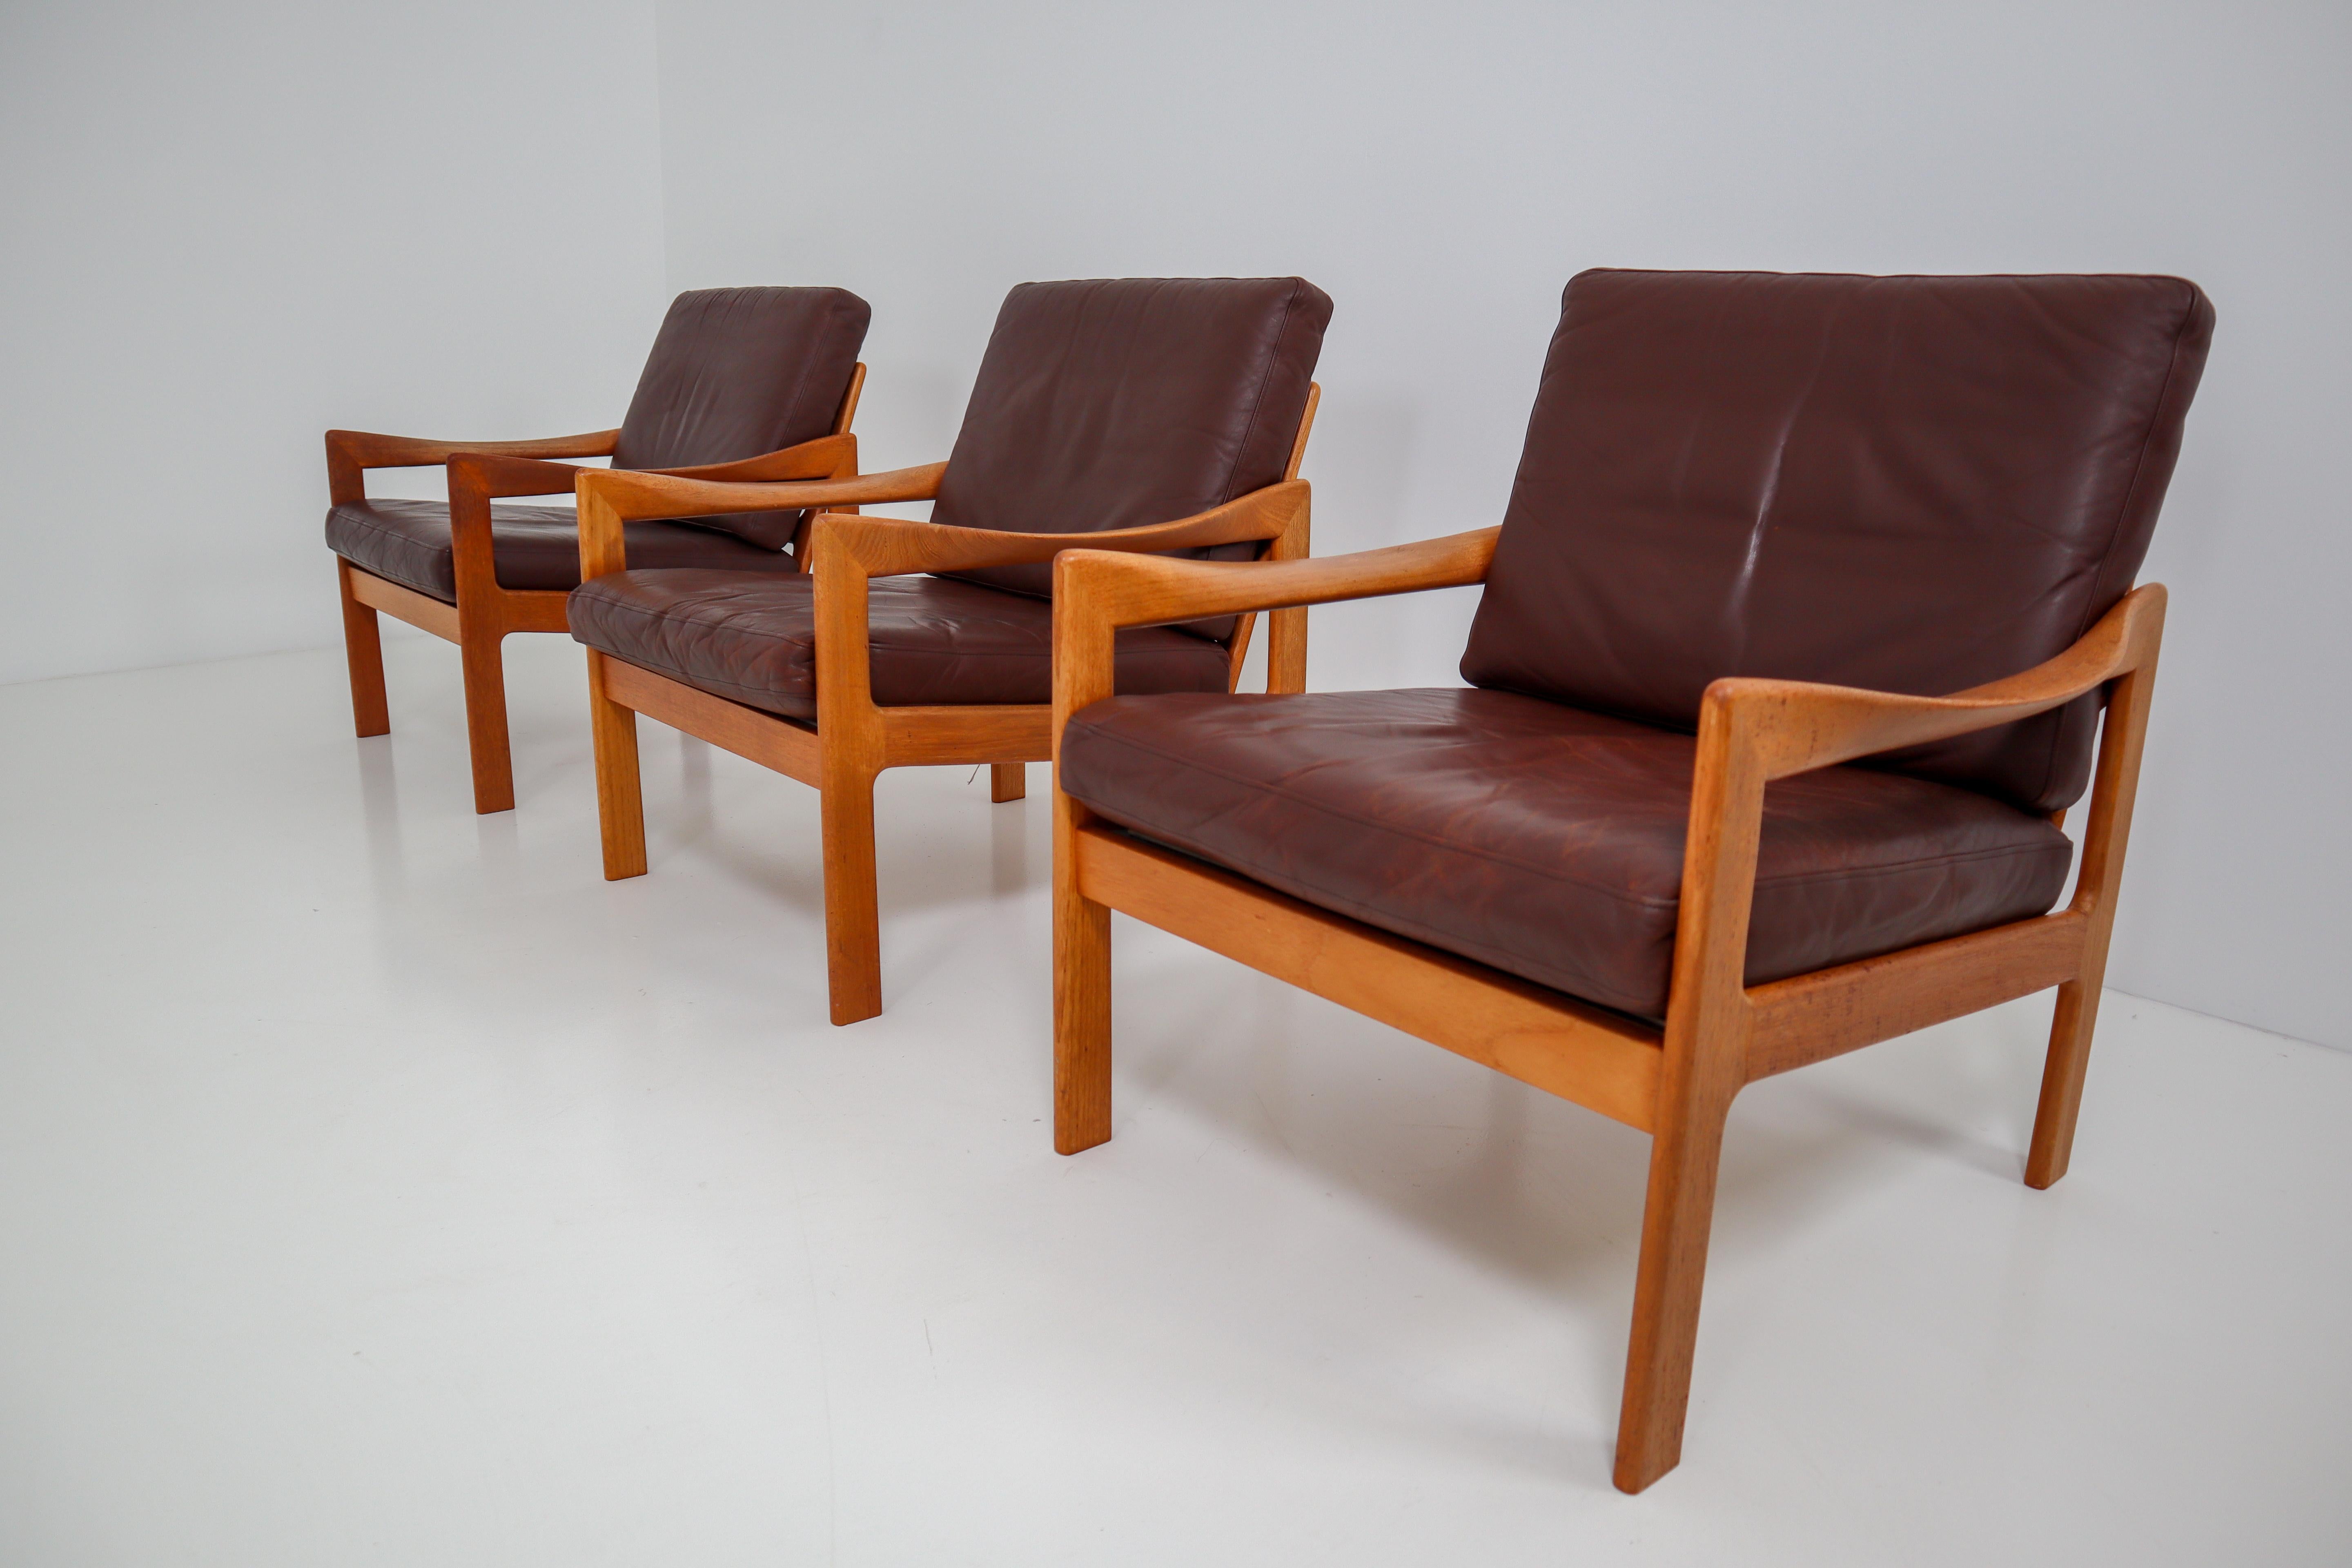 A teak armchair designed by Illum Wikkelsø and produced by Eilersen, Denmark, circa 1960. This beautiful midcentury Danish armchair has wonderfully twisted armrests and original leather upholstery with minor signs of usage and patina. A very